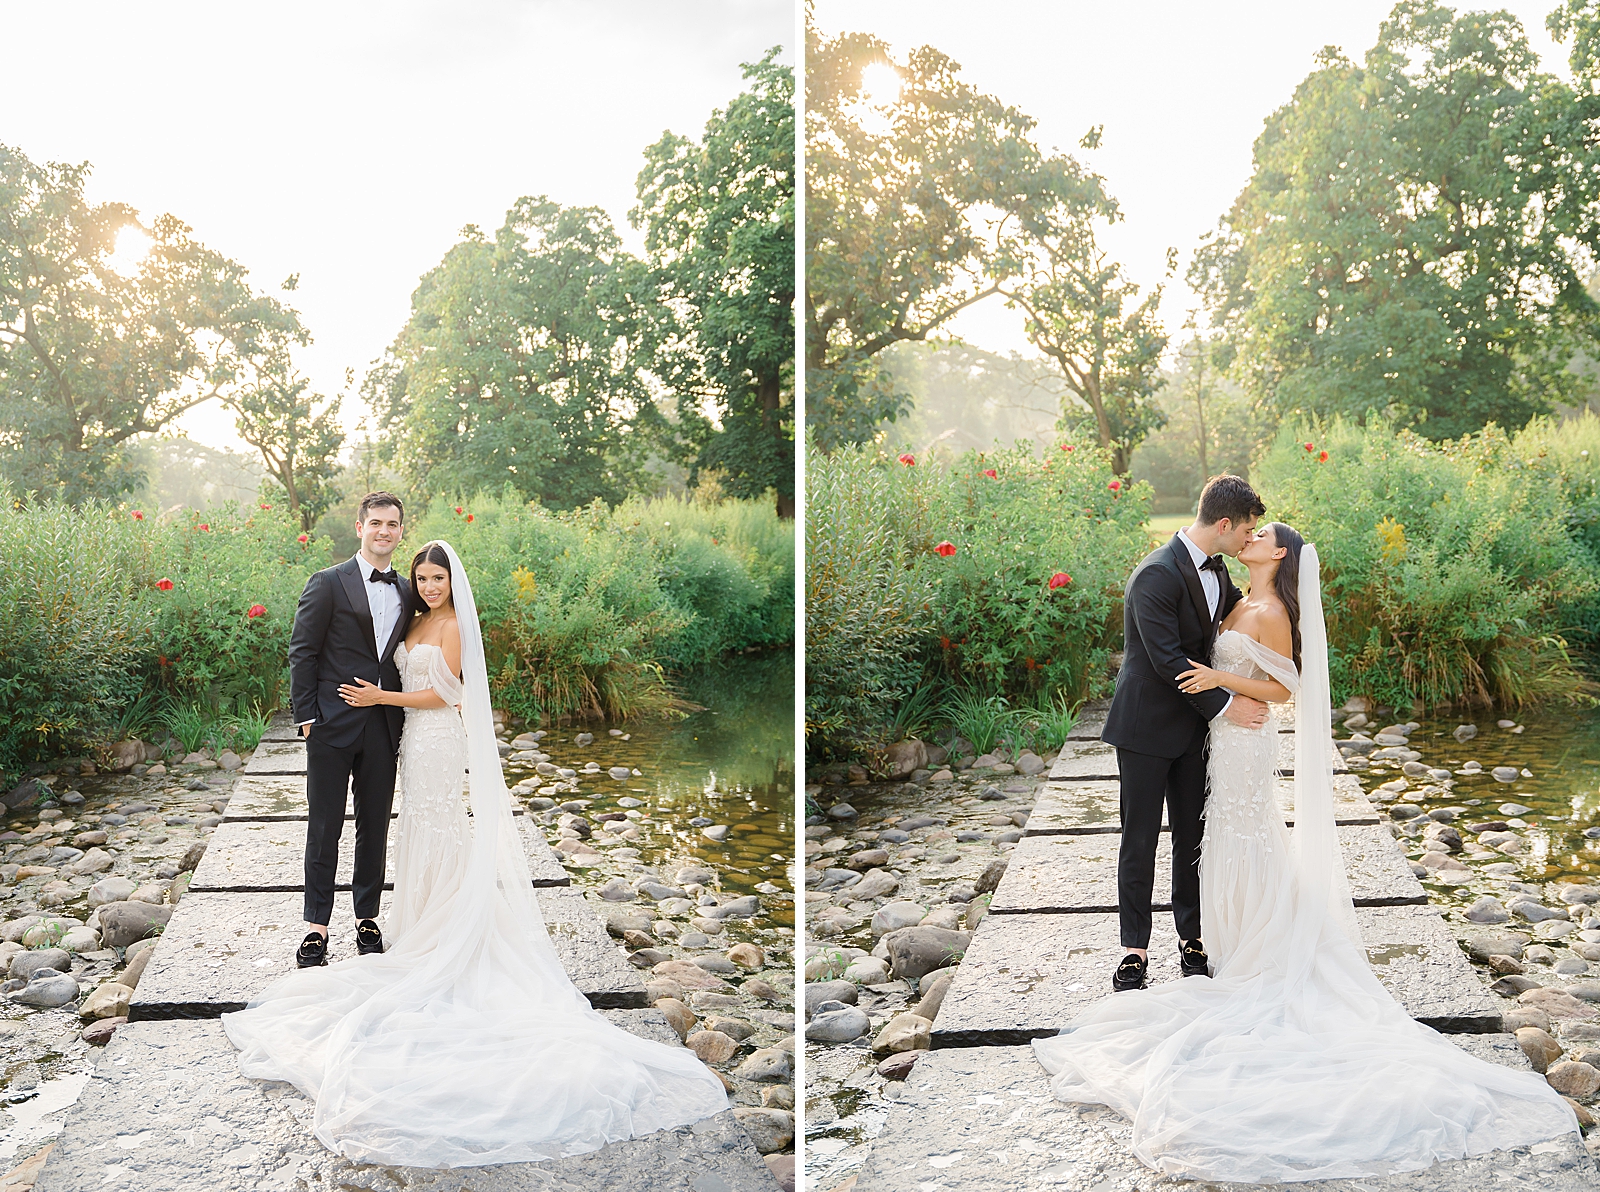 Left photo: Full body shot of the bride and groom standing on a stone pathway that bisects a pond.
Right photo: Full body shot of the bride and groom sharing a kiss on a stone path that bisects a pond. 